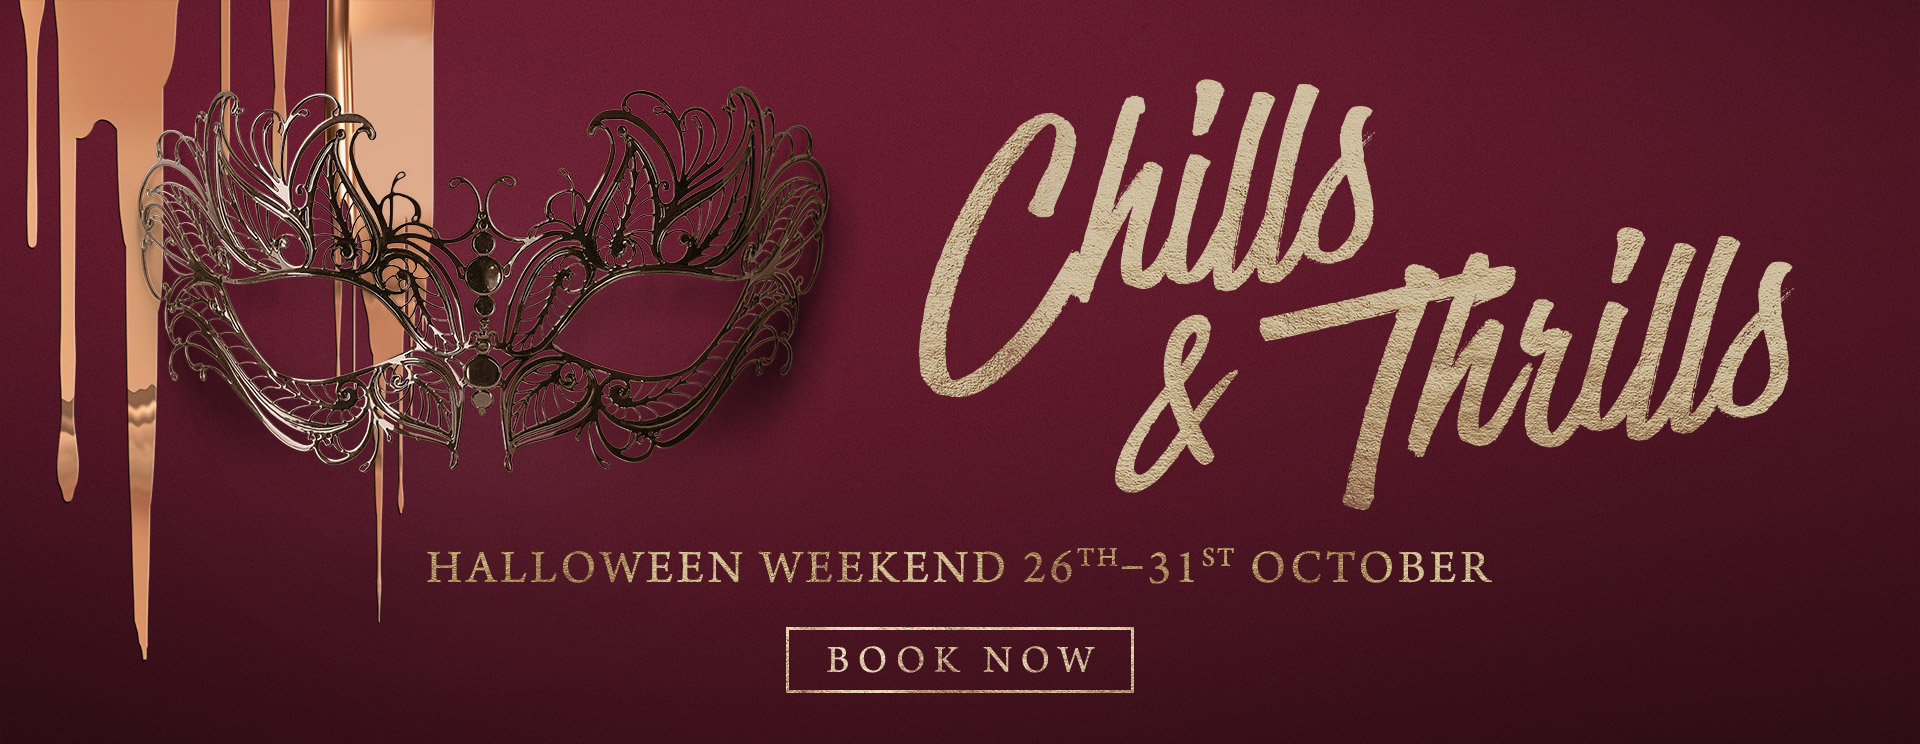 Chills & Thrills this Halloween at The King William IV